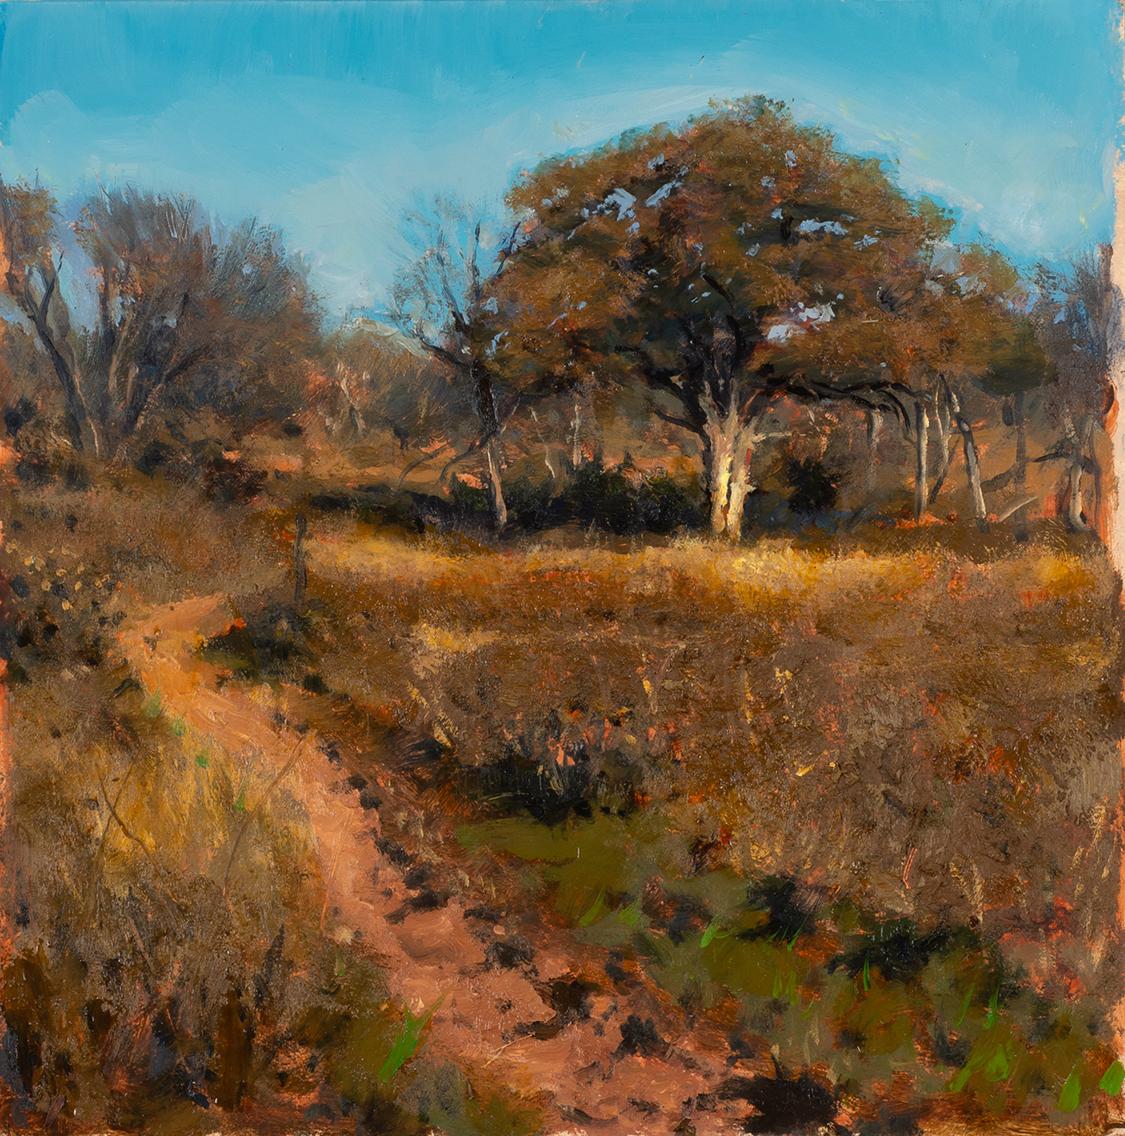 Bob Stuth-Wade Landscape Painting - Trail Between Thorns